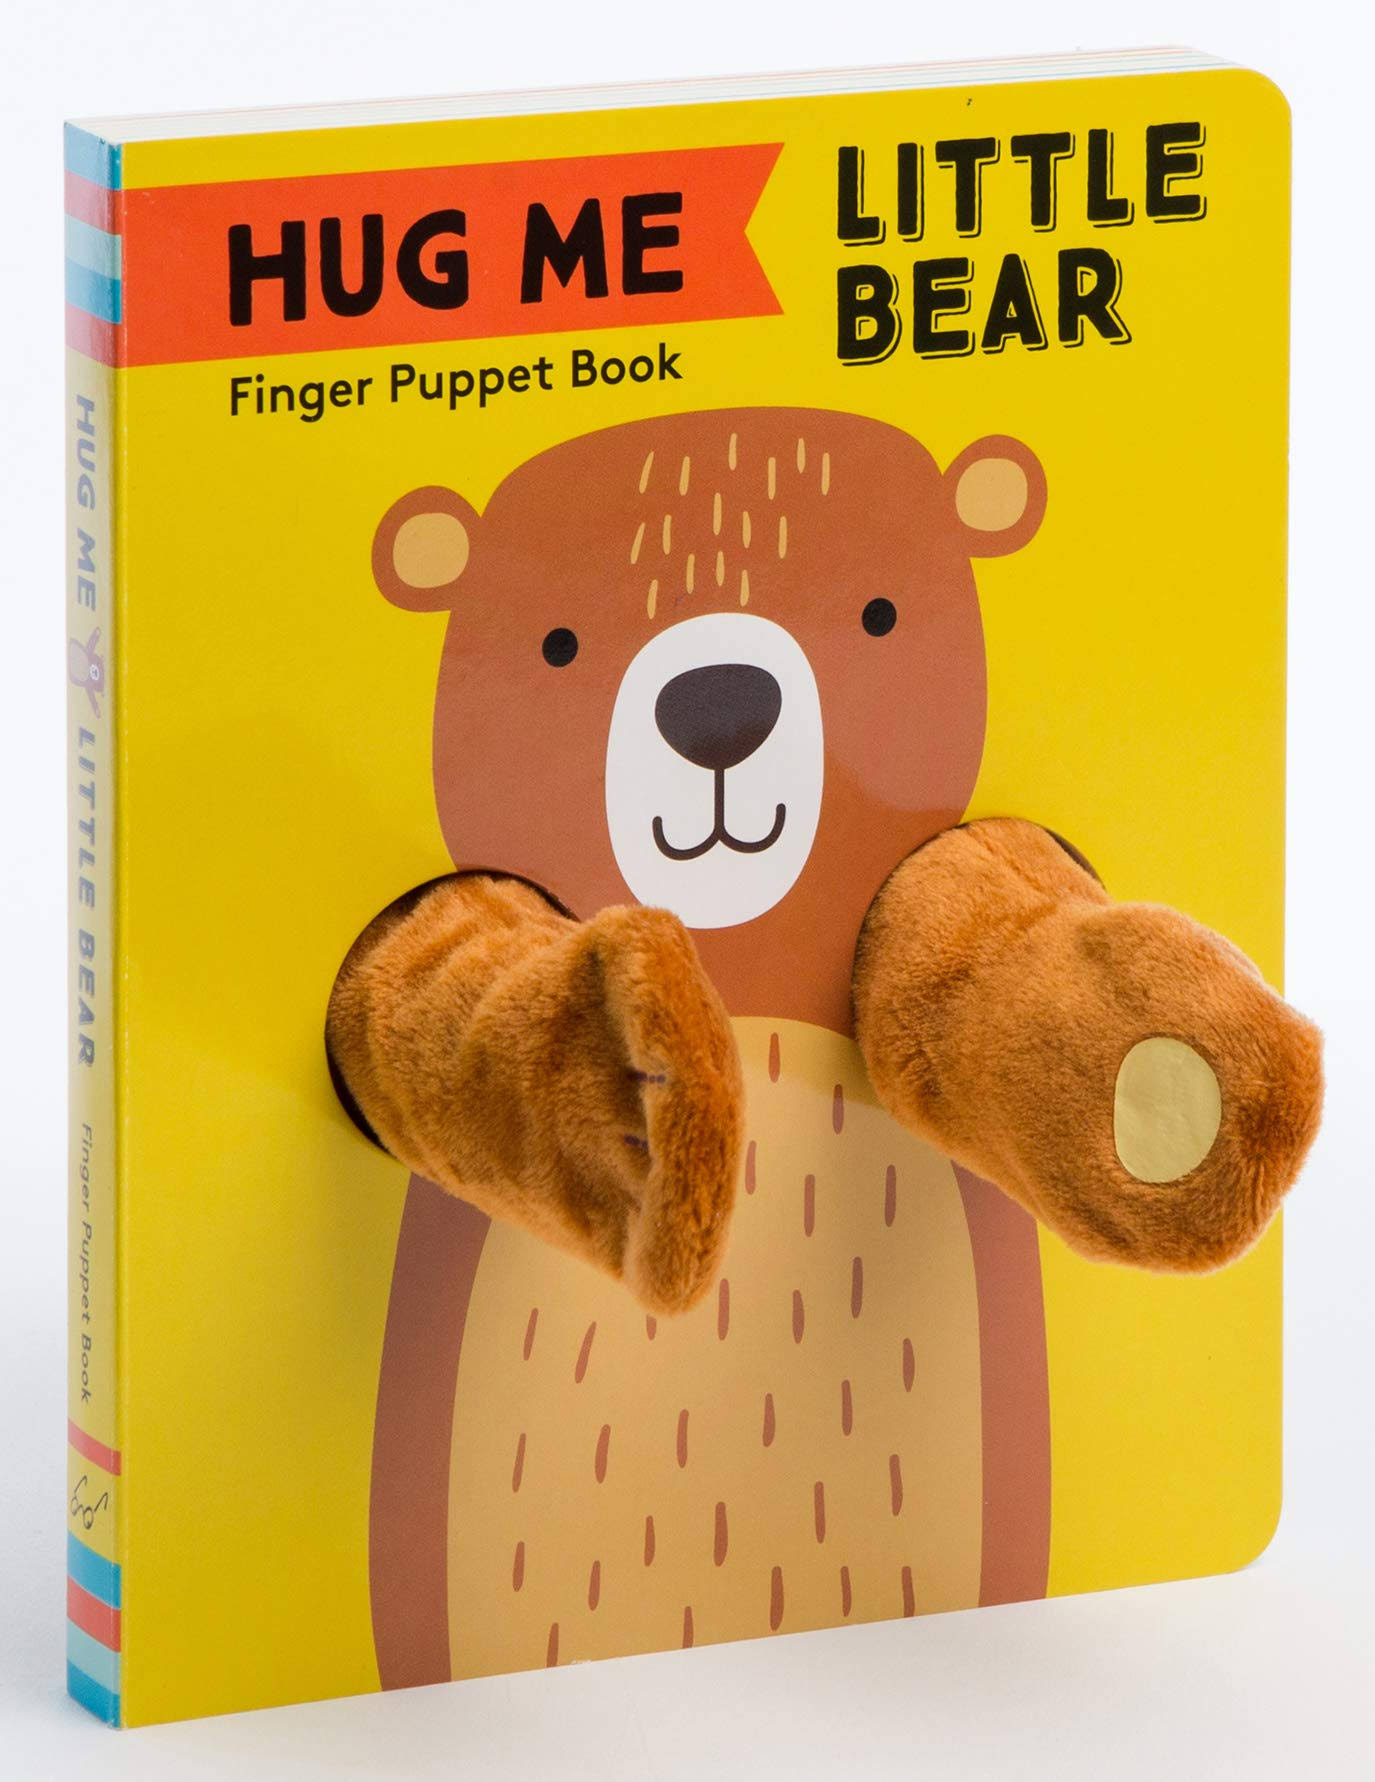 Hug Me Little Bear: Finger Puppet Book: (Baby's First Book, Animal Books for Toddlers, Interactive Books for Toddlers) [Book]